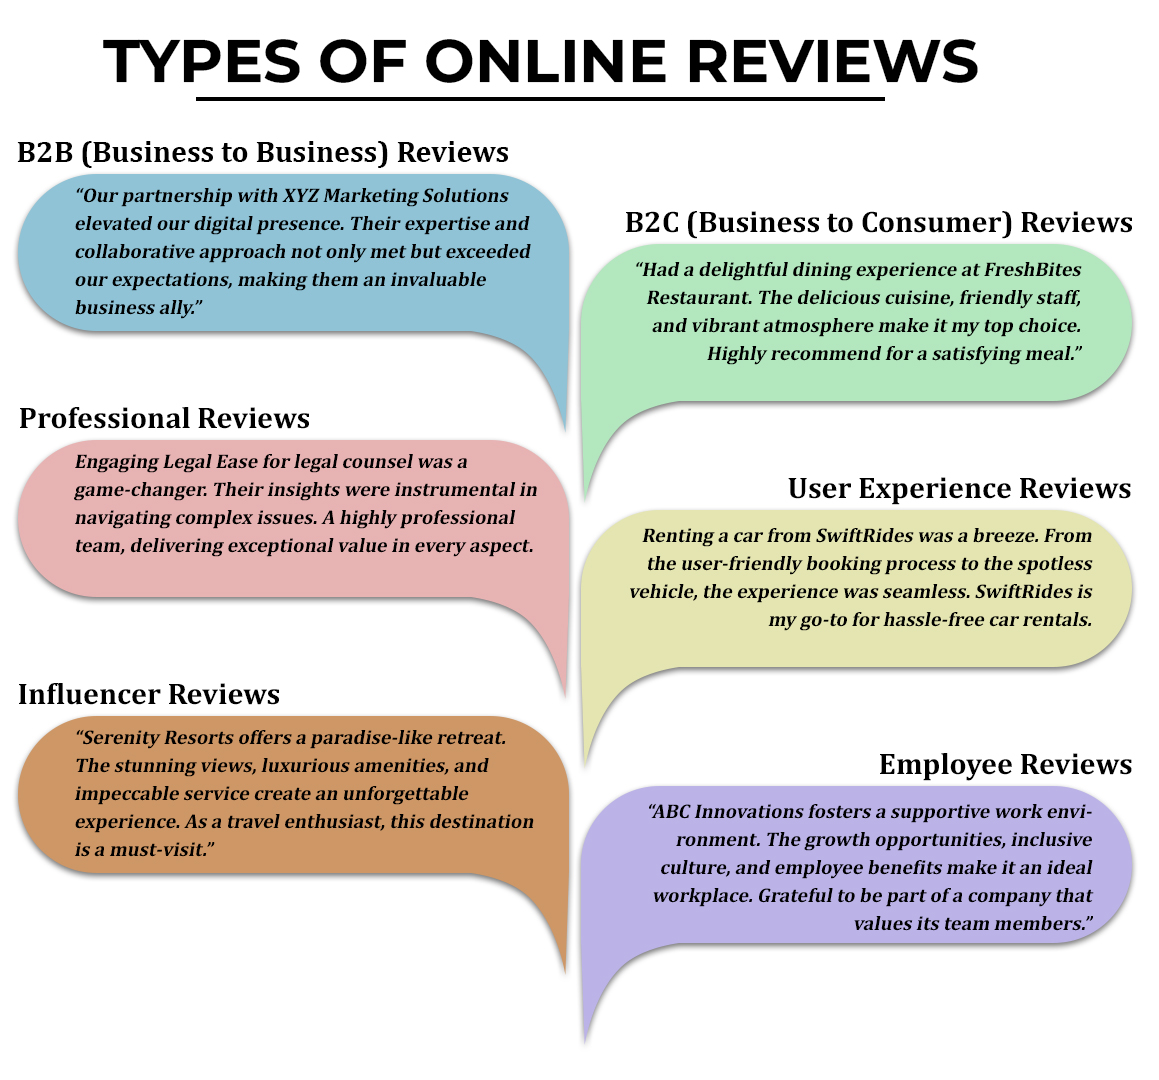 Types-of-Online-Reviews